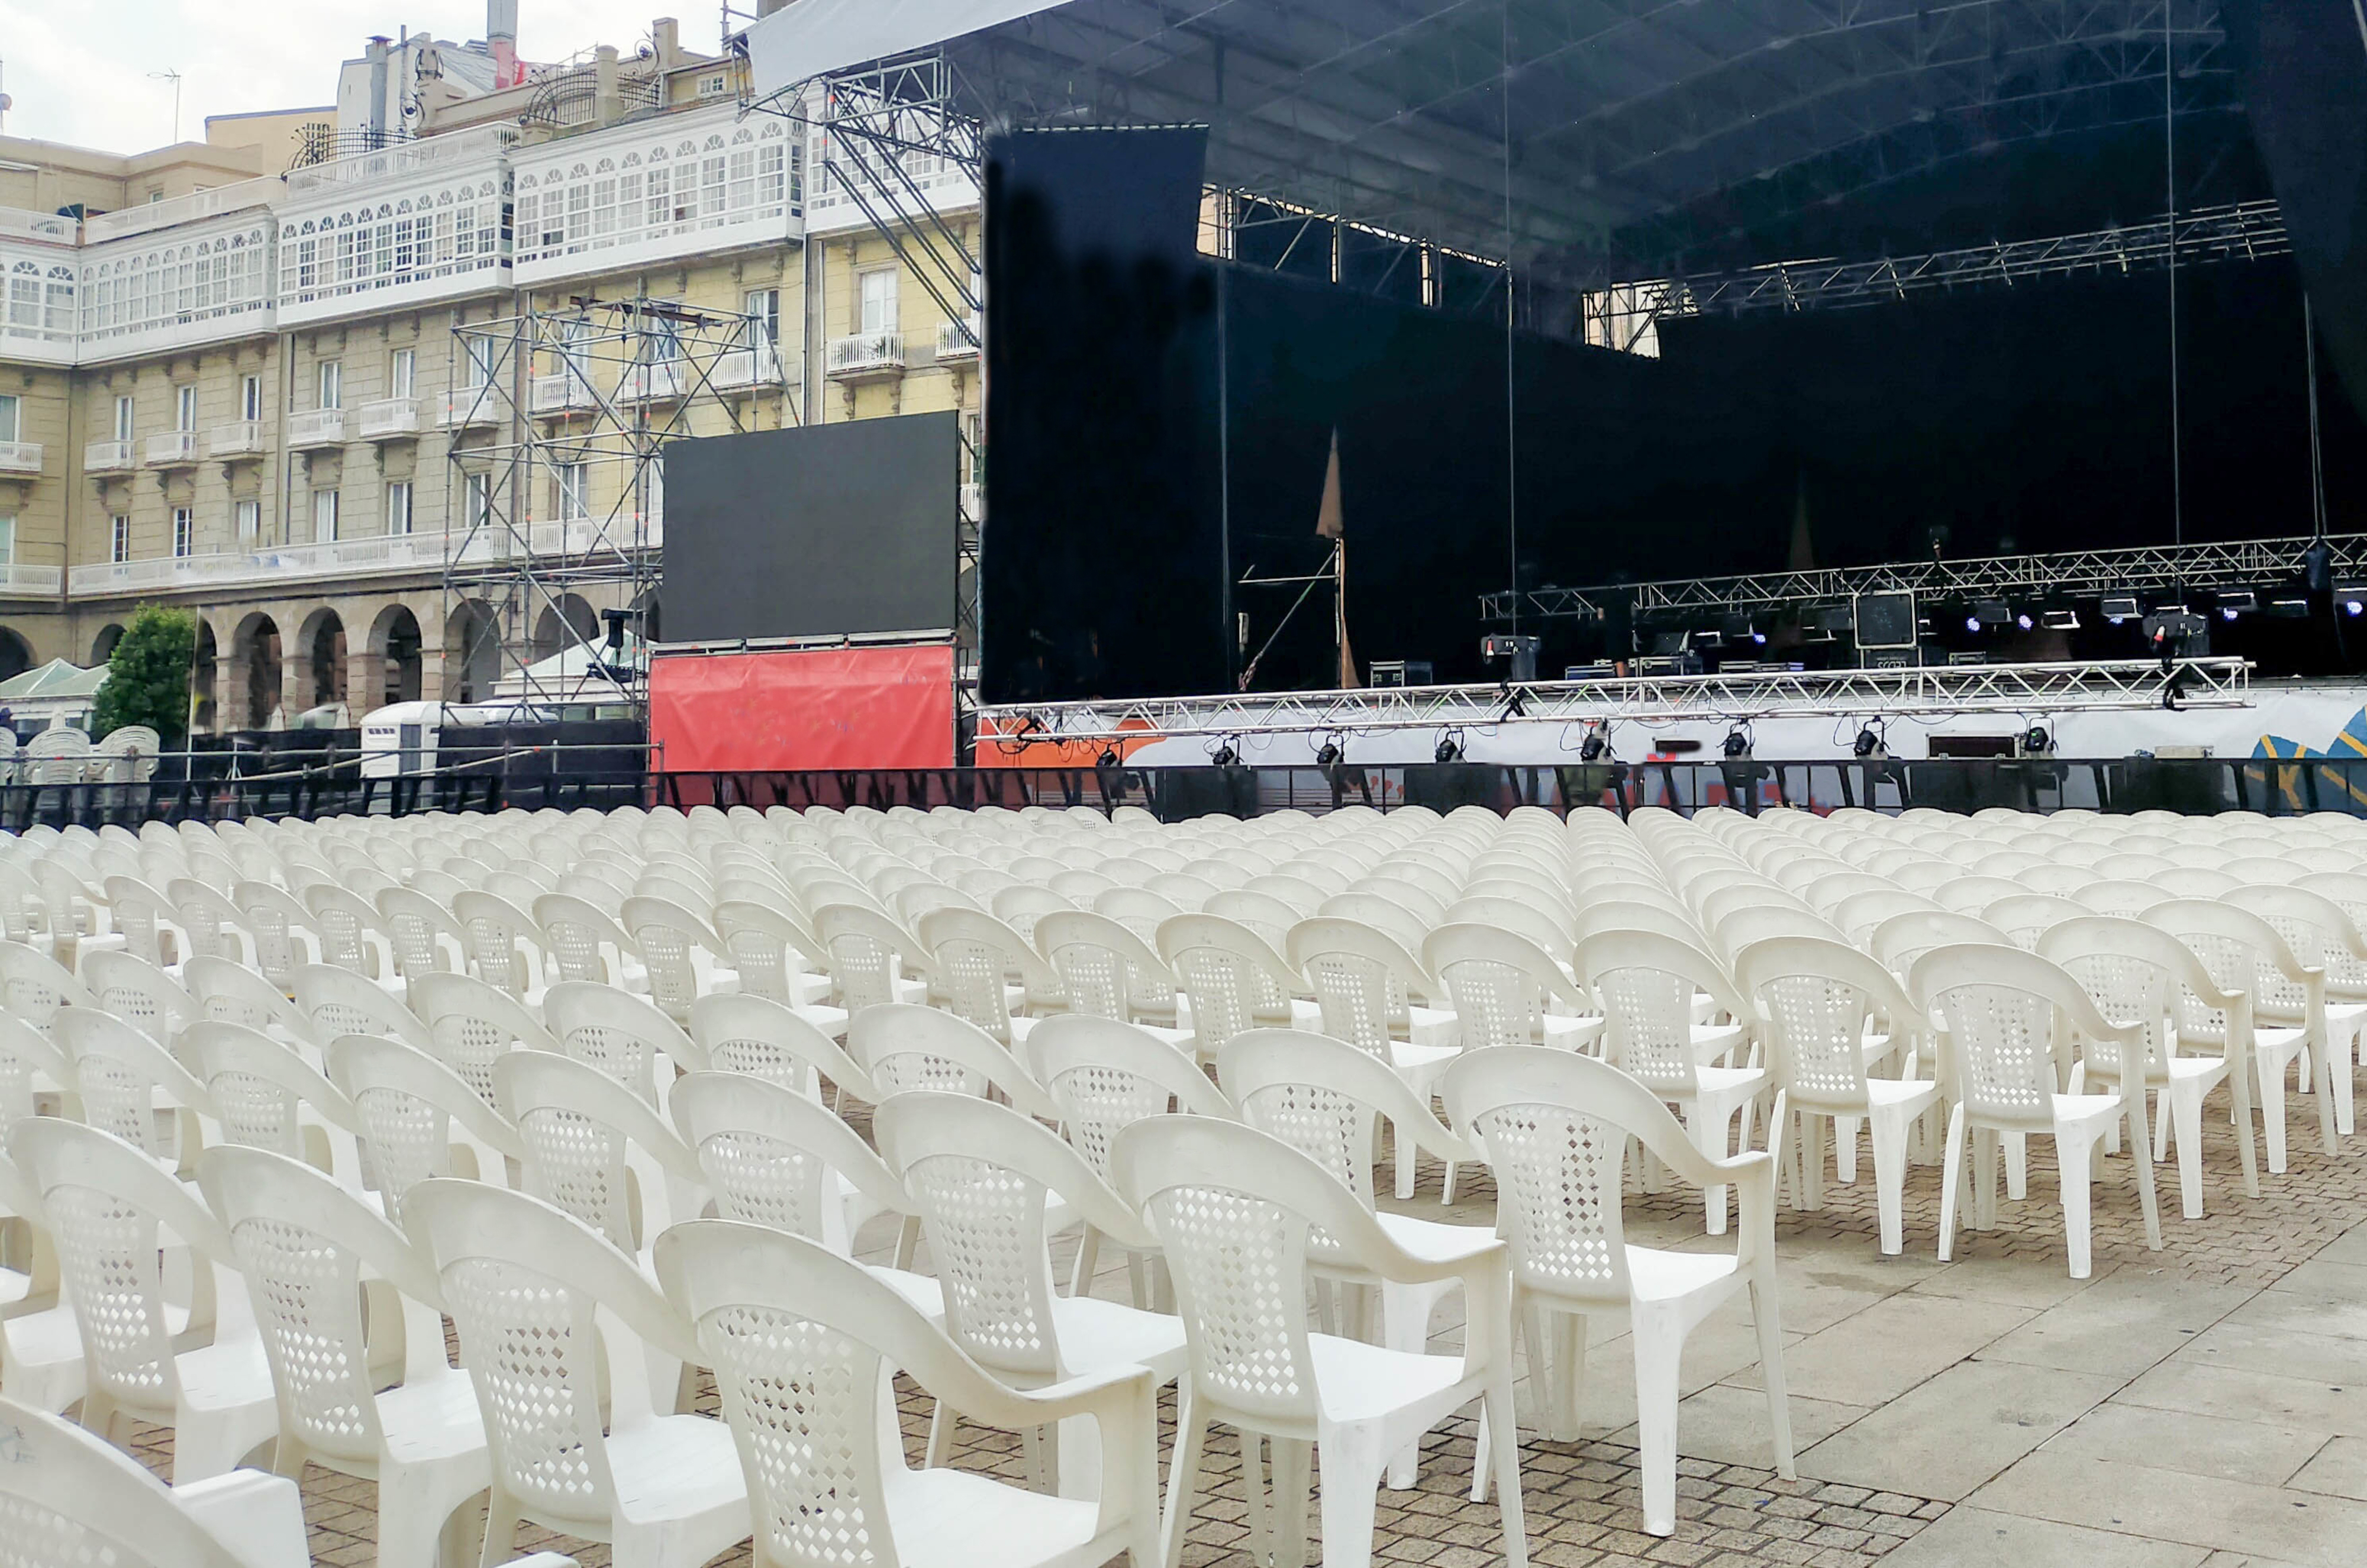 Empty white chairs set up for an outdoor event facing a large stage